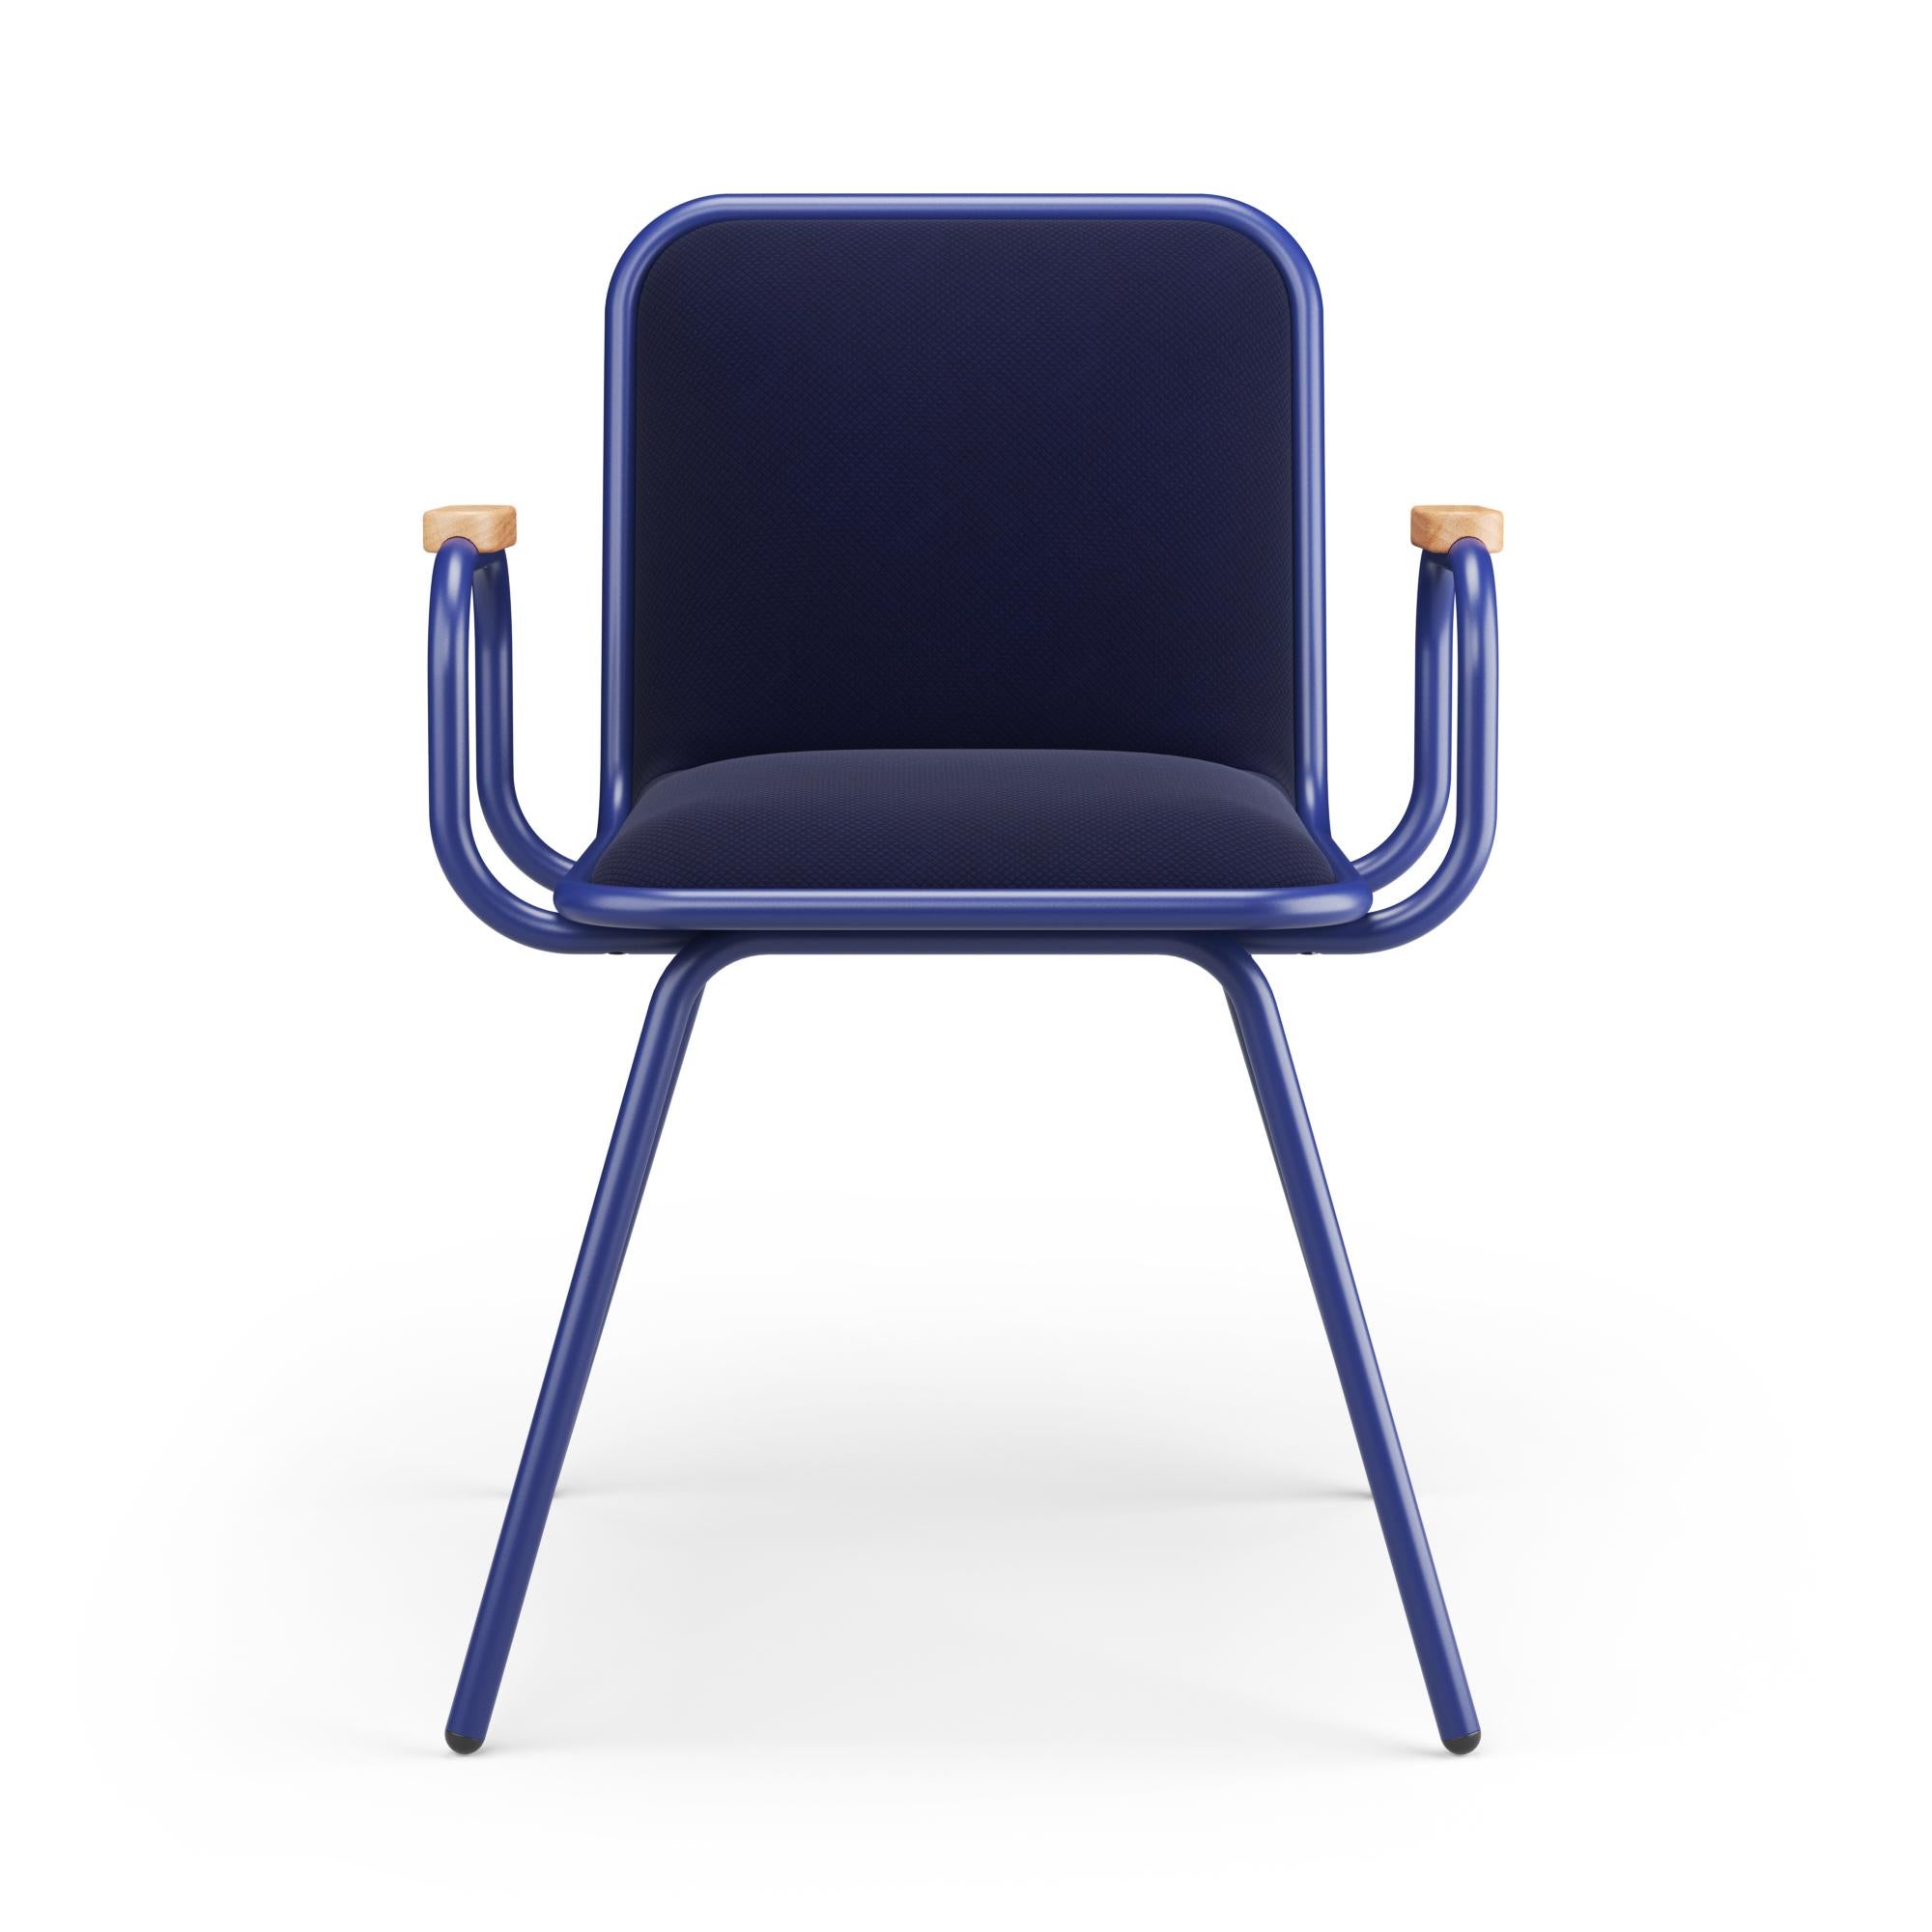 Metalwork Hayche Dulwich with Armrest - Blue, UK, Made to Order For Sale